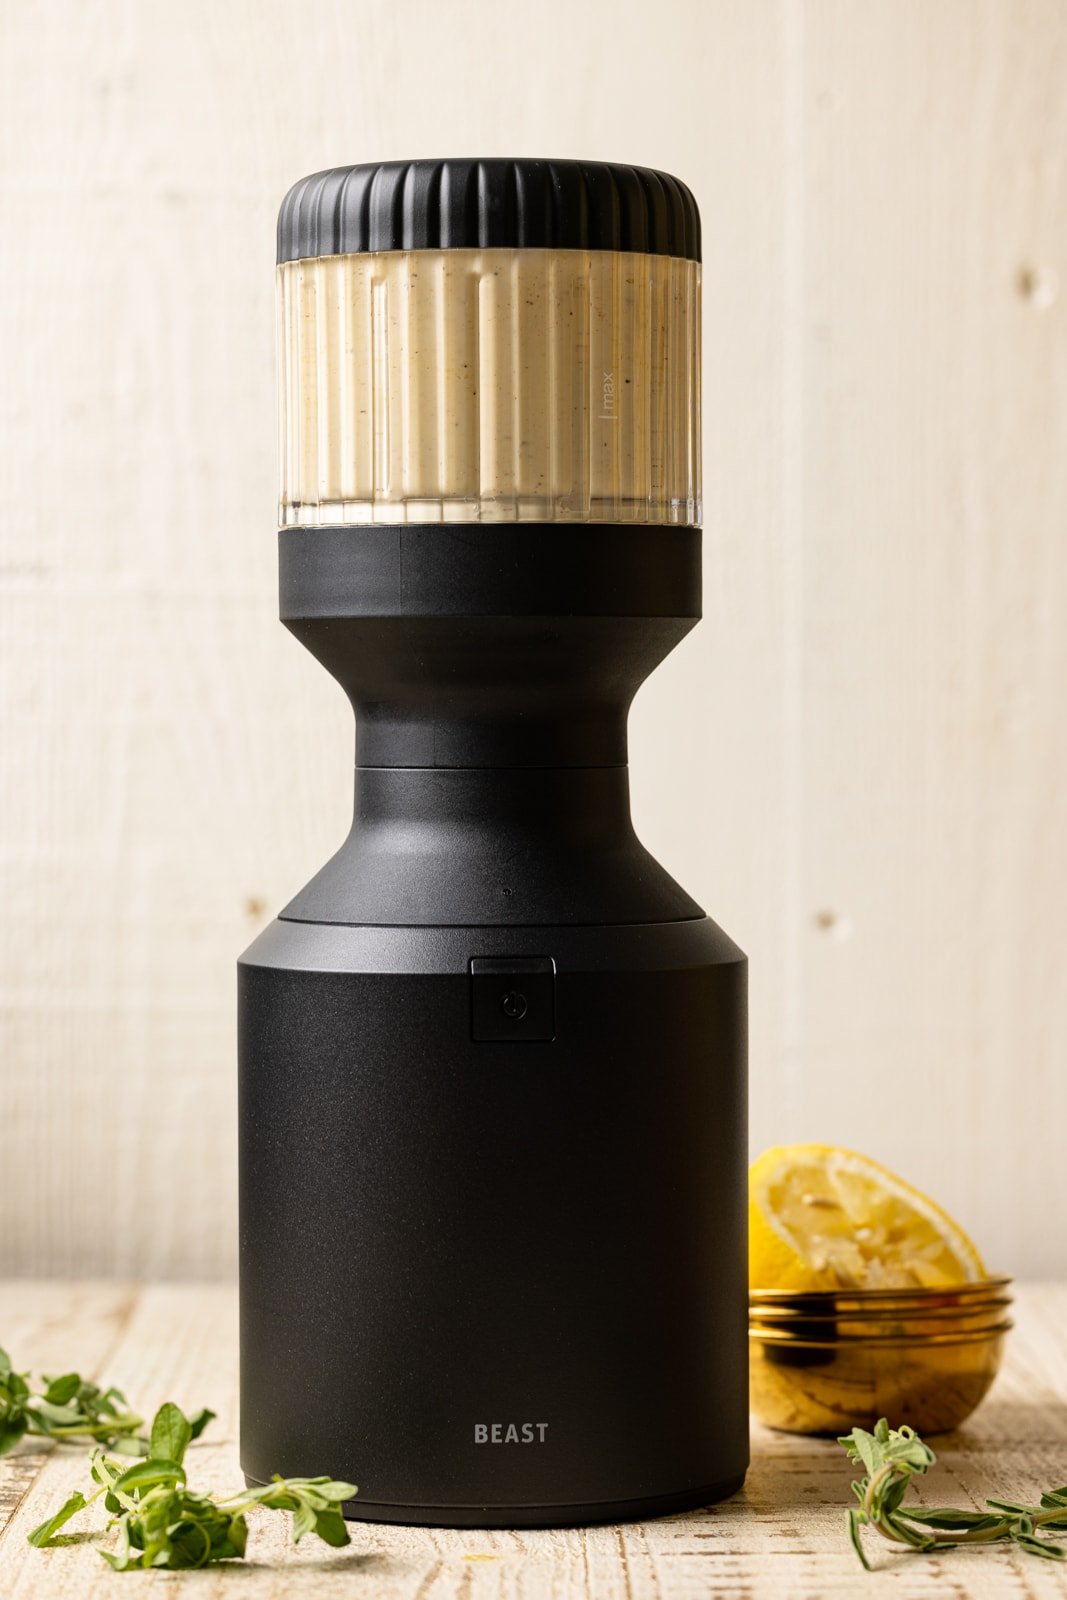 Honey mustard in a black blender being shown on a white wood table.